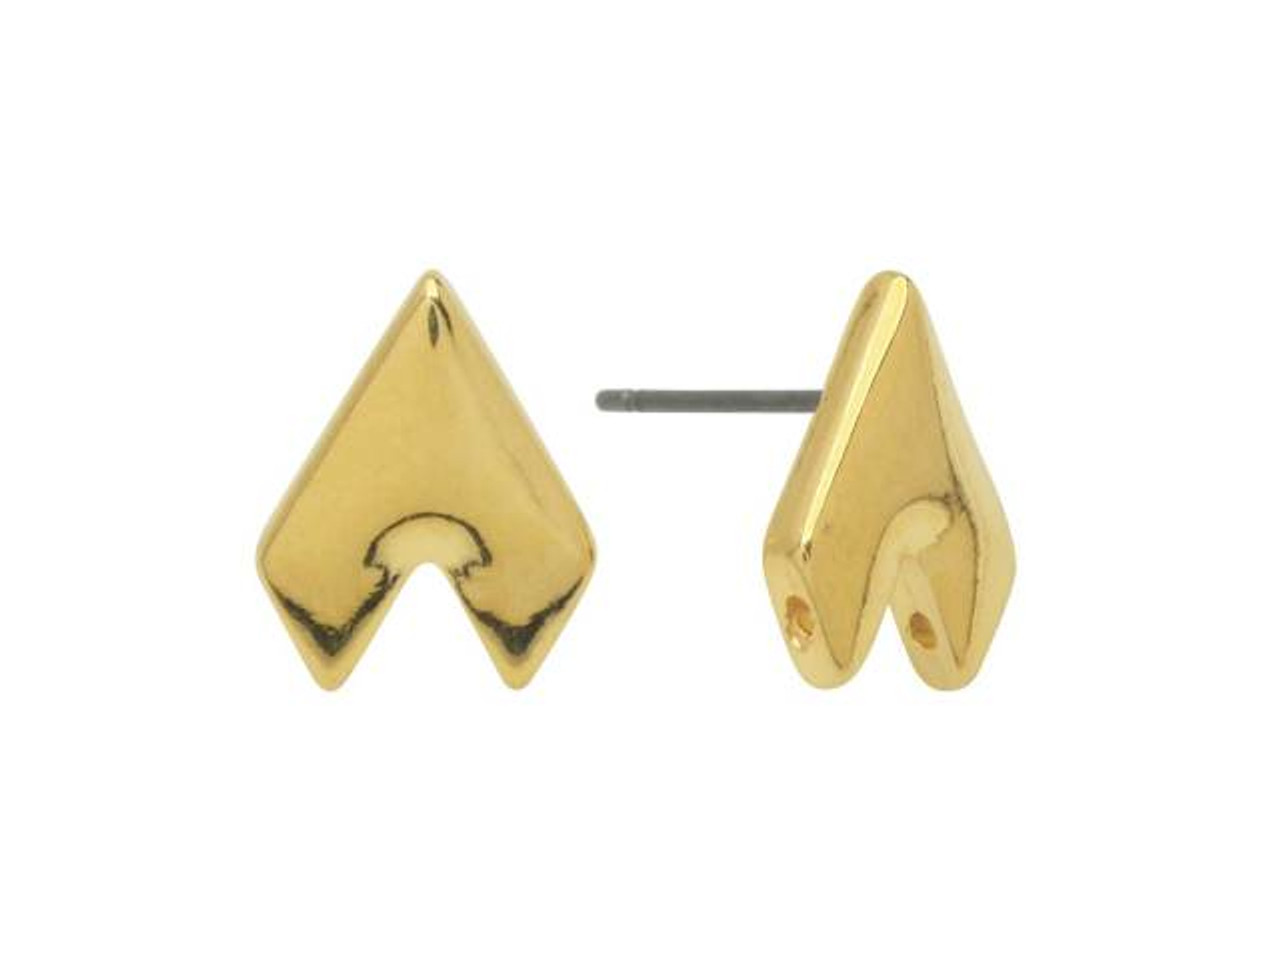 Cymbal Earring Posts for Delica & Round Beads, Venio II, Round